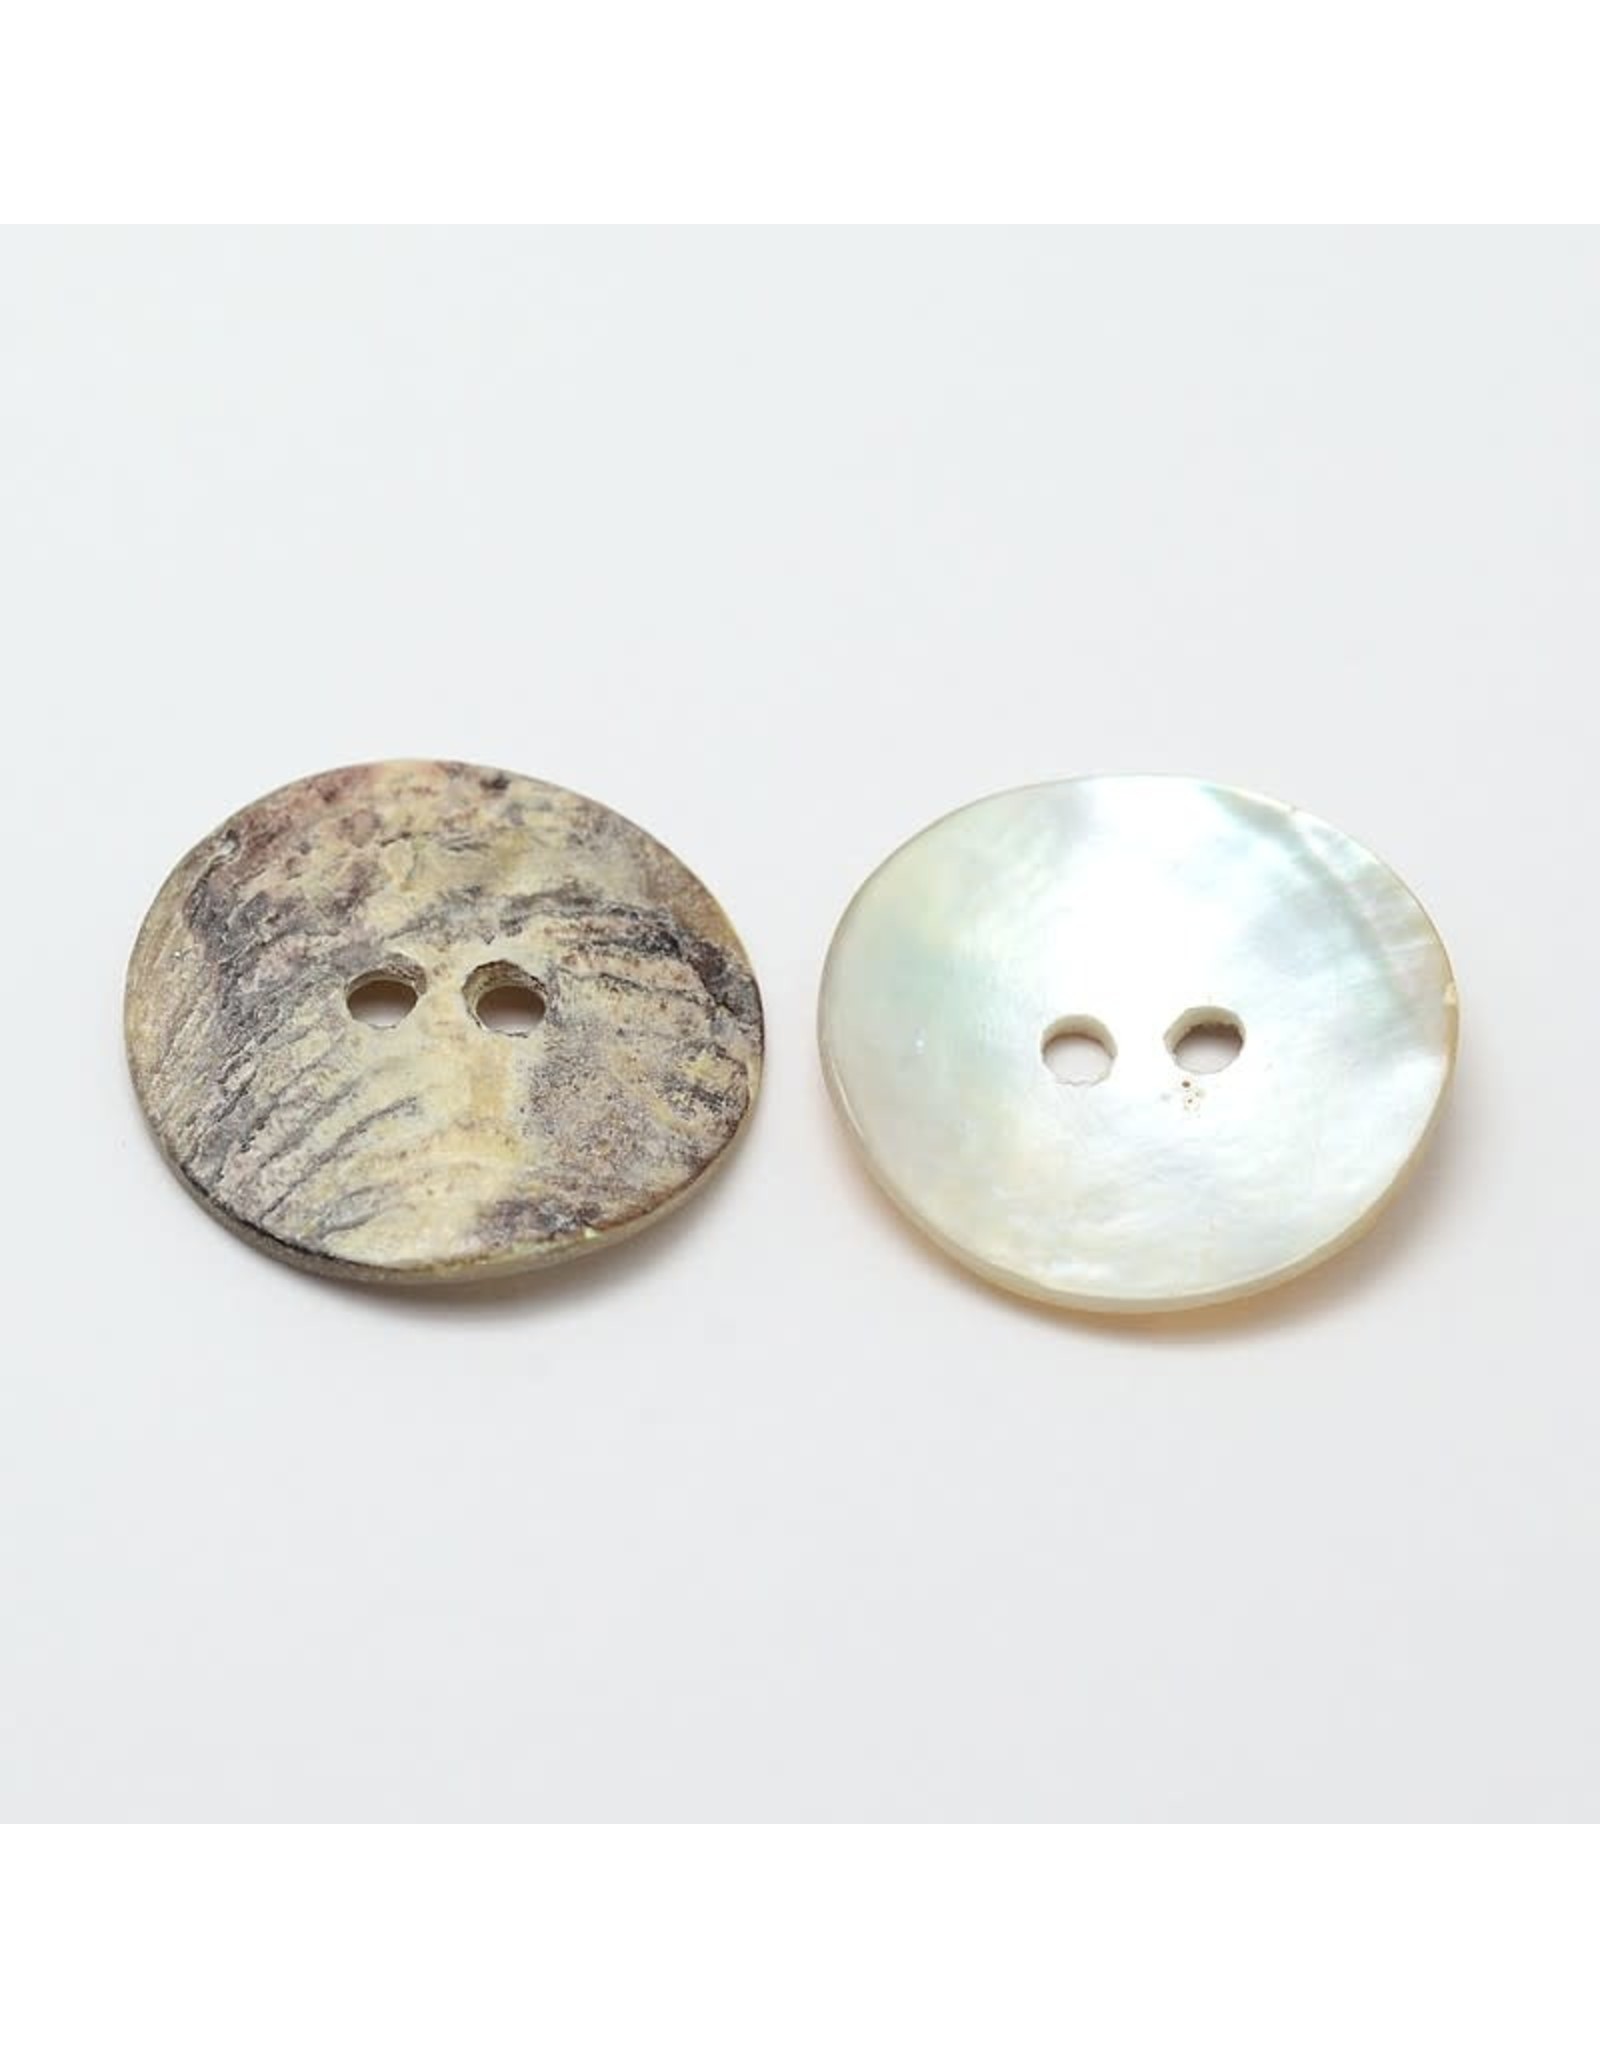 Mother of Pearl Shell Button 20mm x50